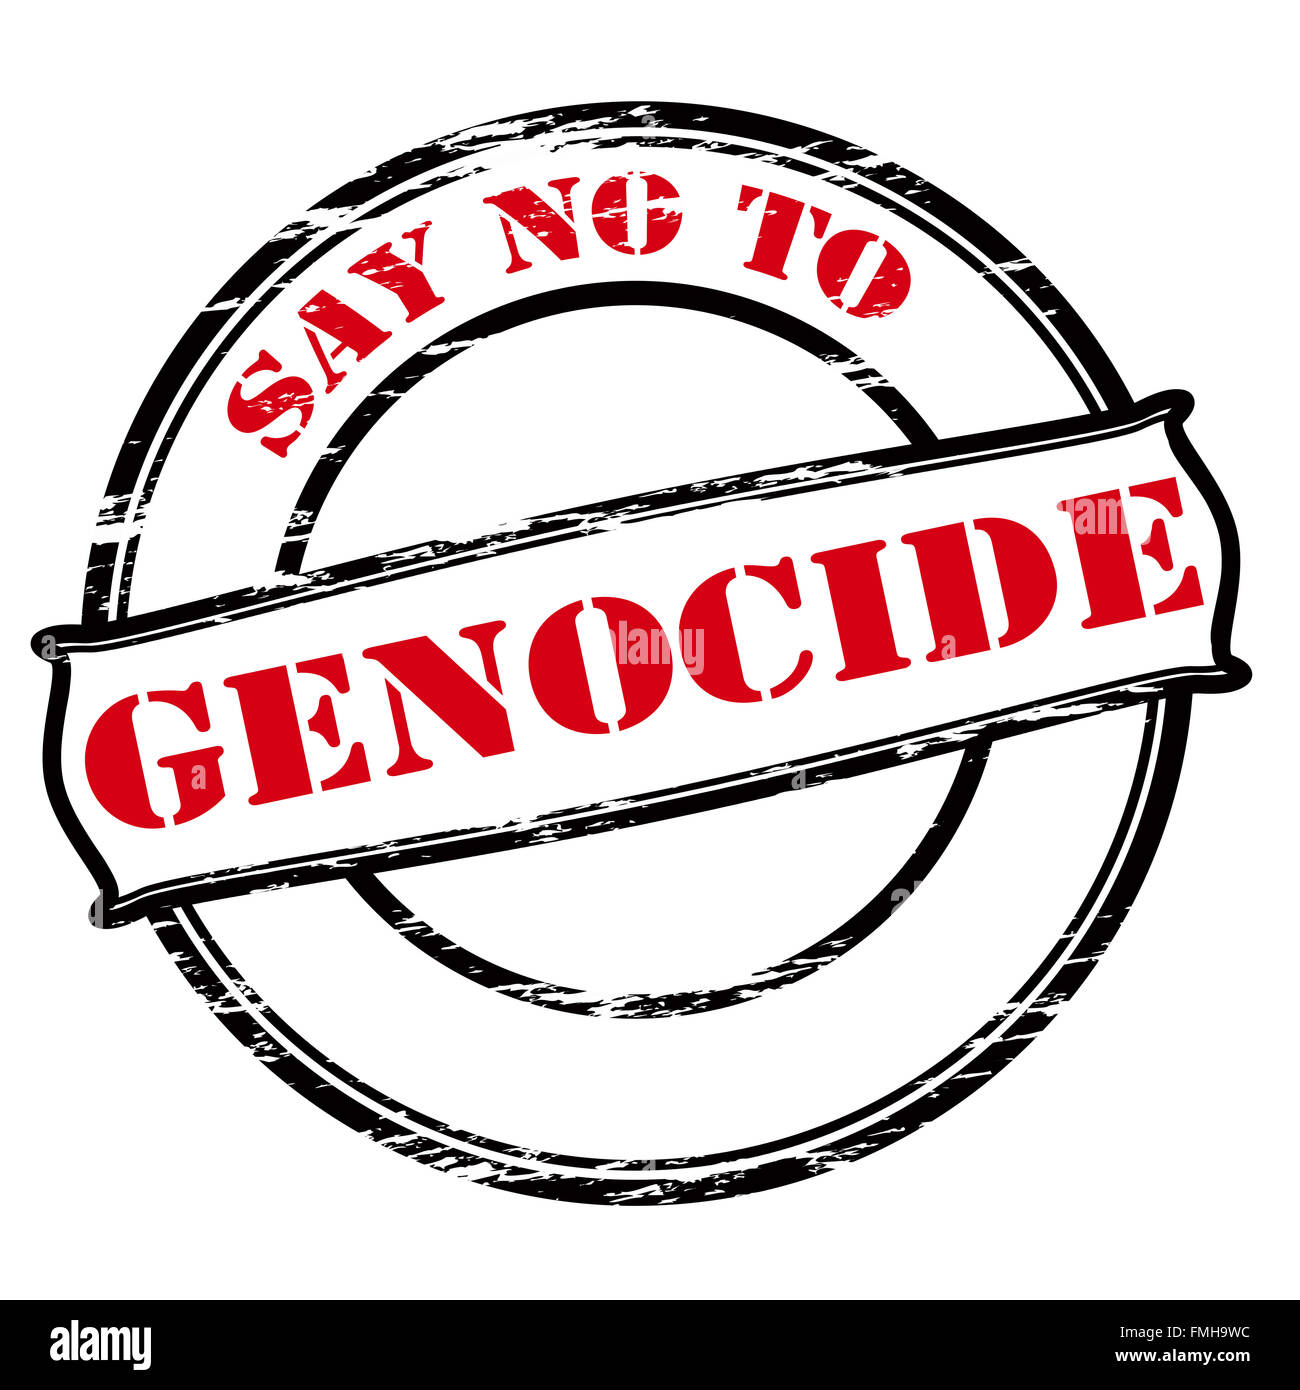 Rubber stamp with text say no to genocide inside, vector illustration Stock Photo